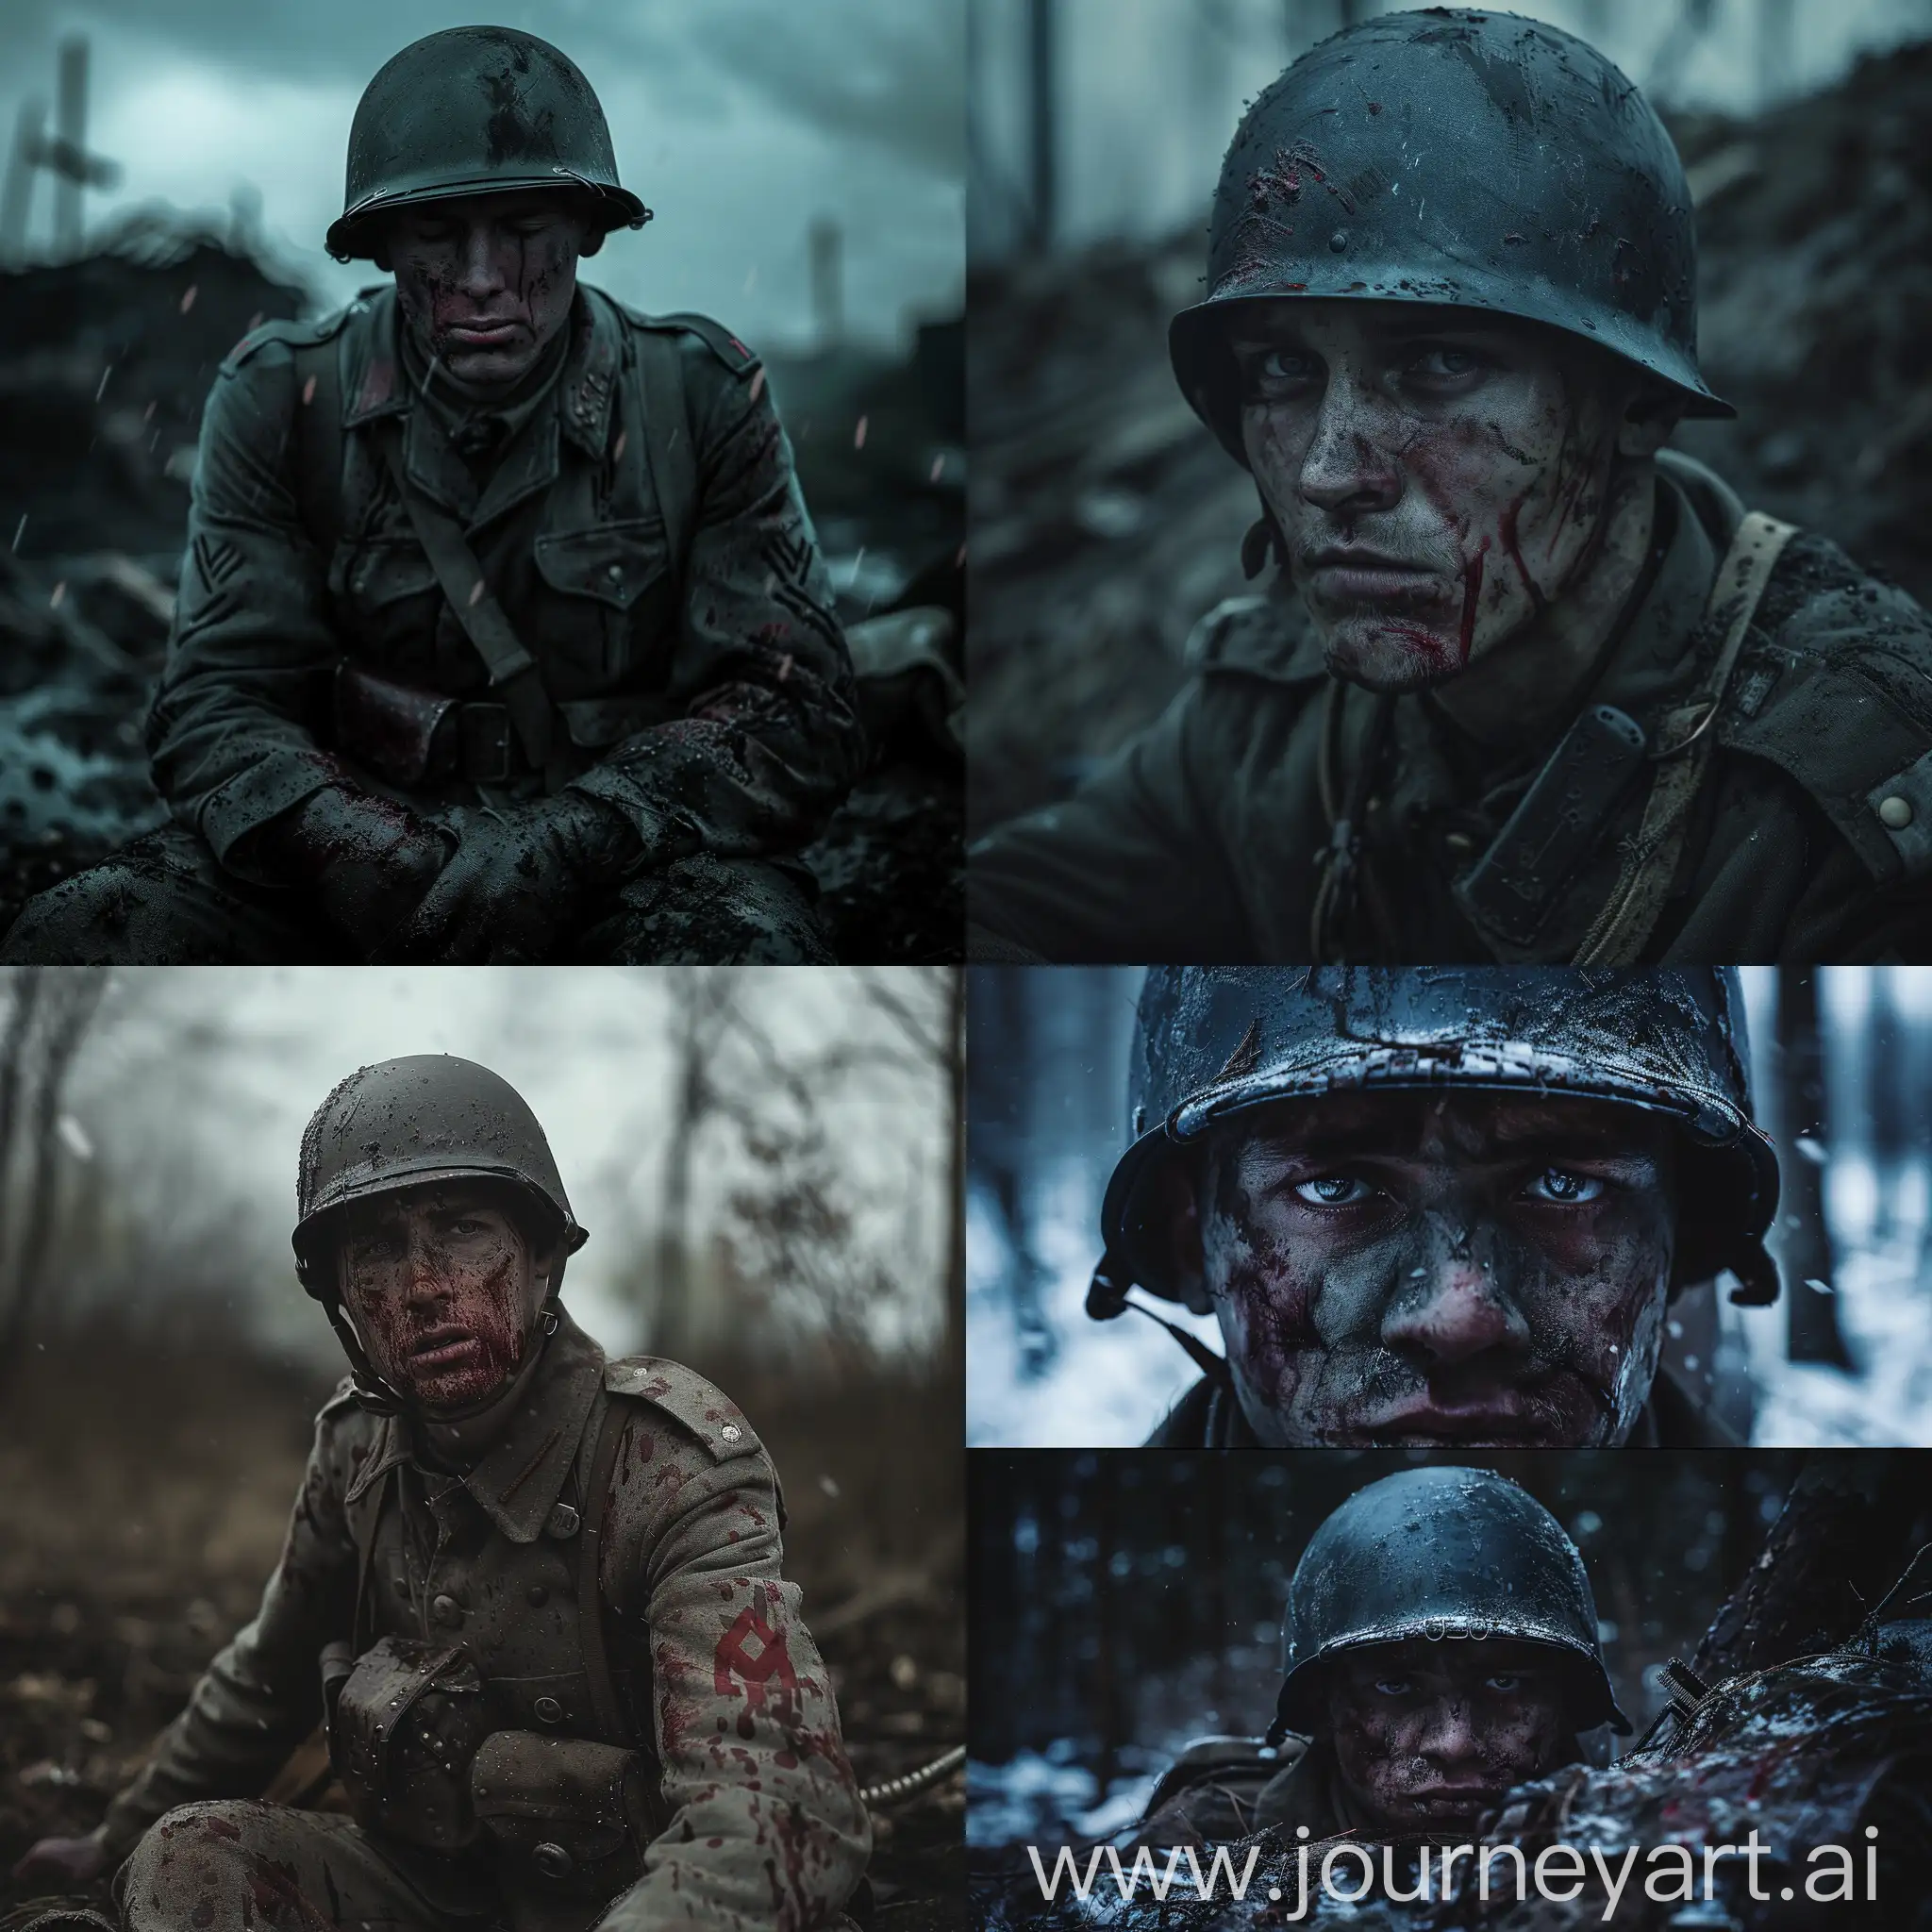 Wounded-WWII-Soldier-in-Dark-Fantasy-Style